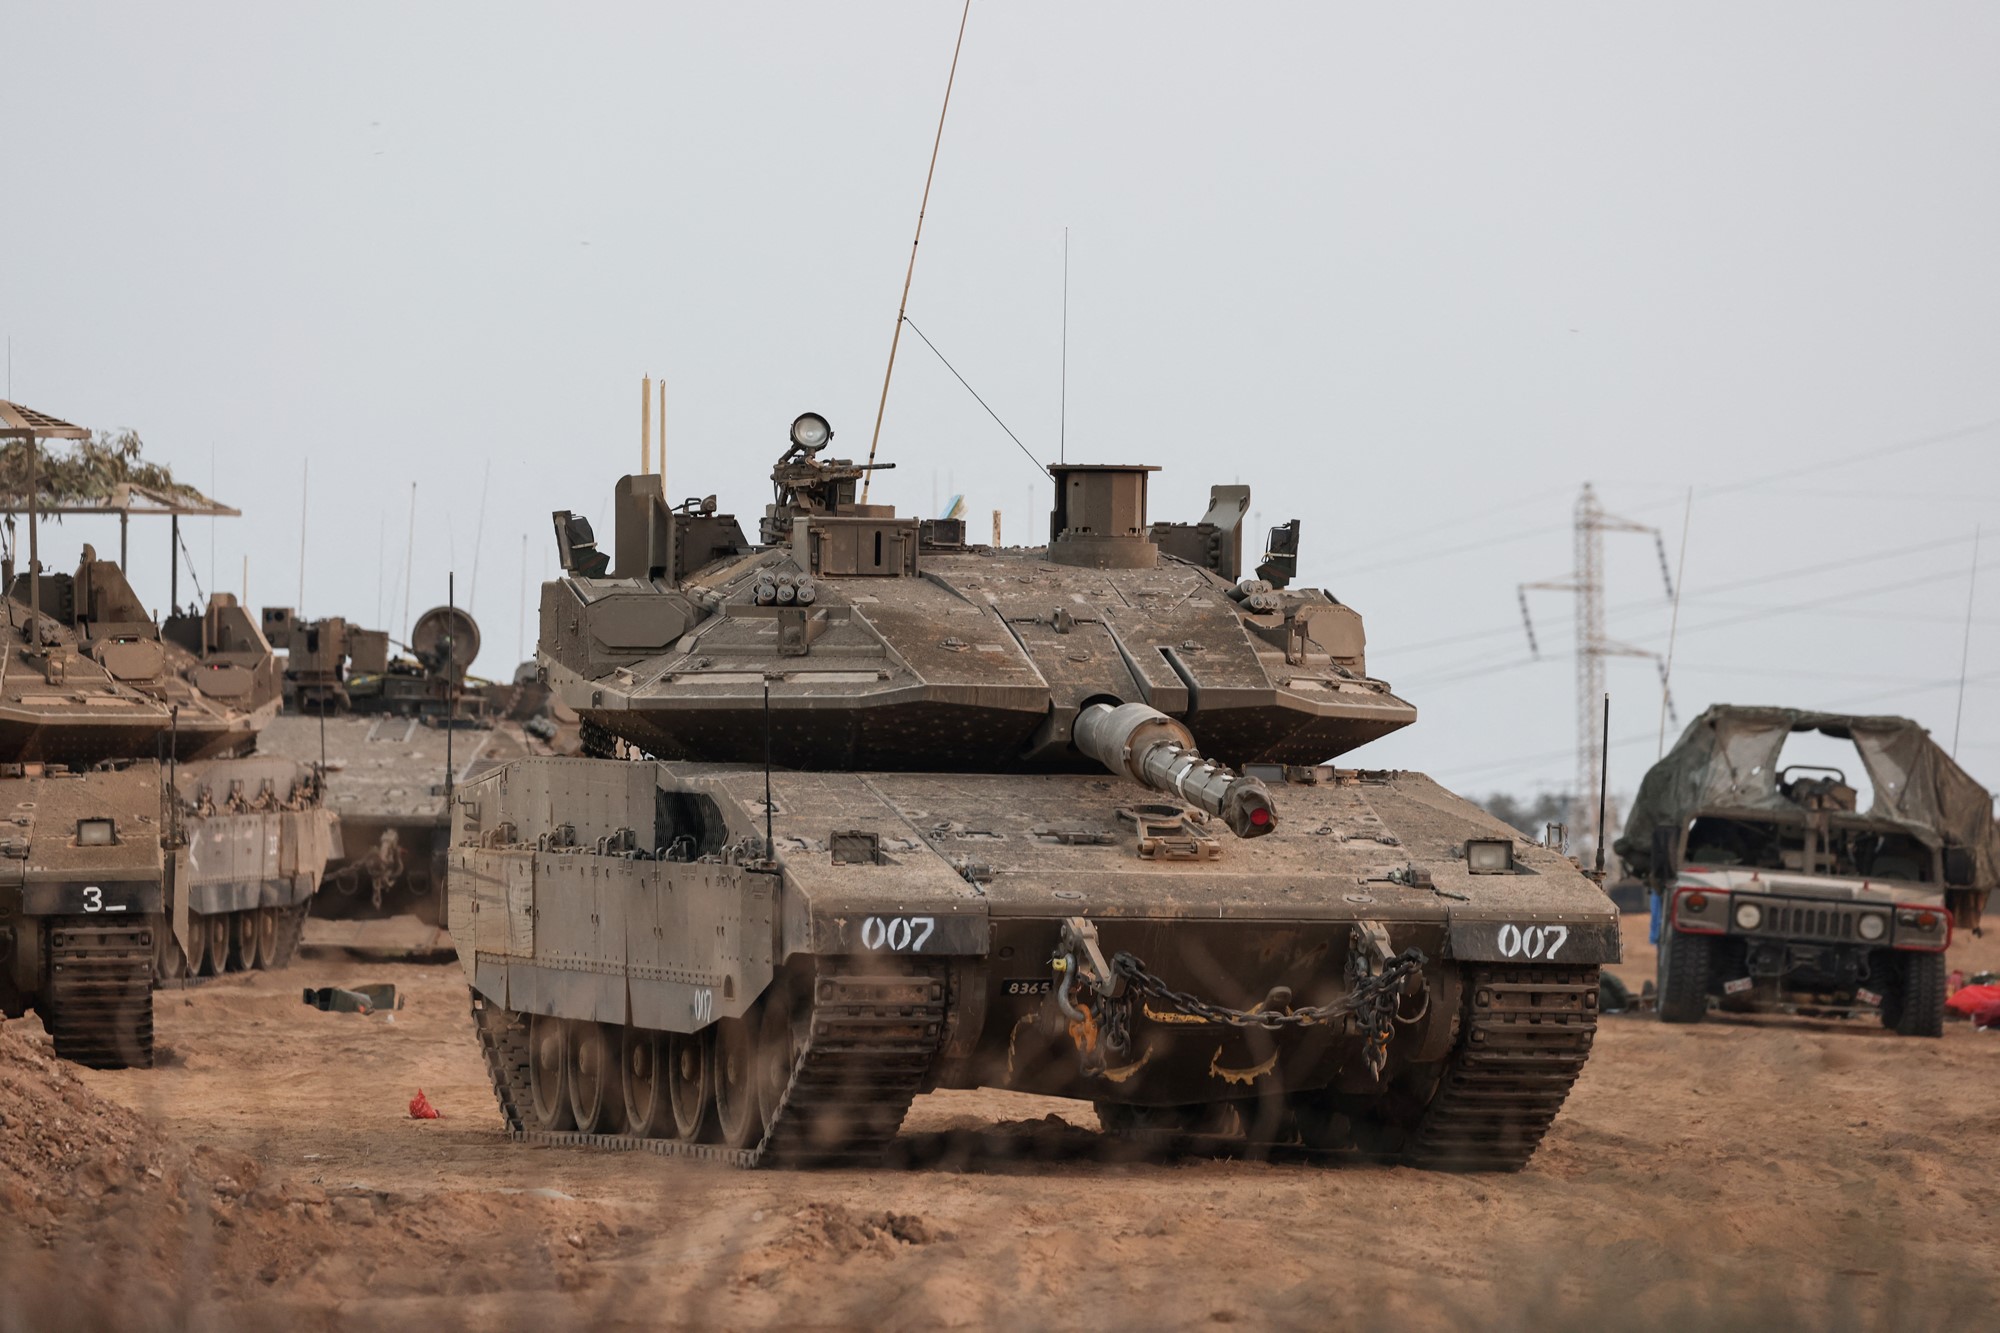 A brown tank and other military vehicles stand on some brown dirt.